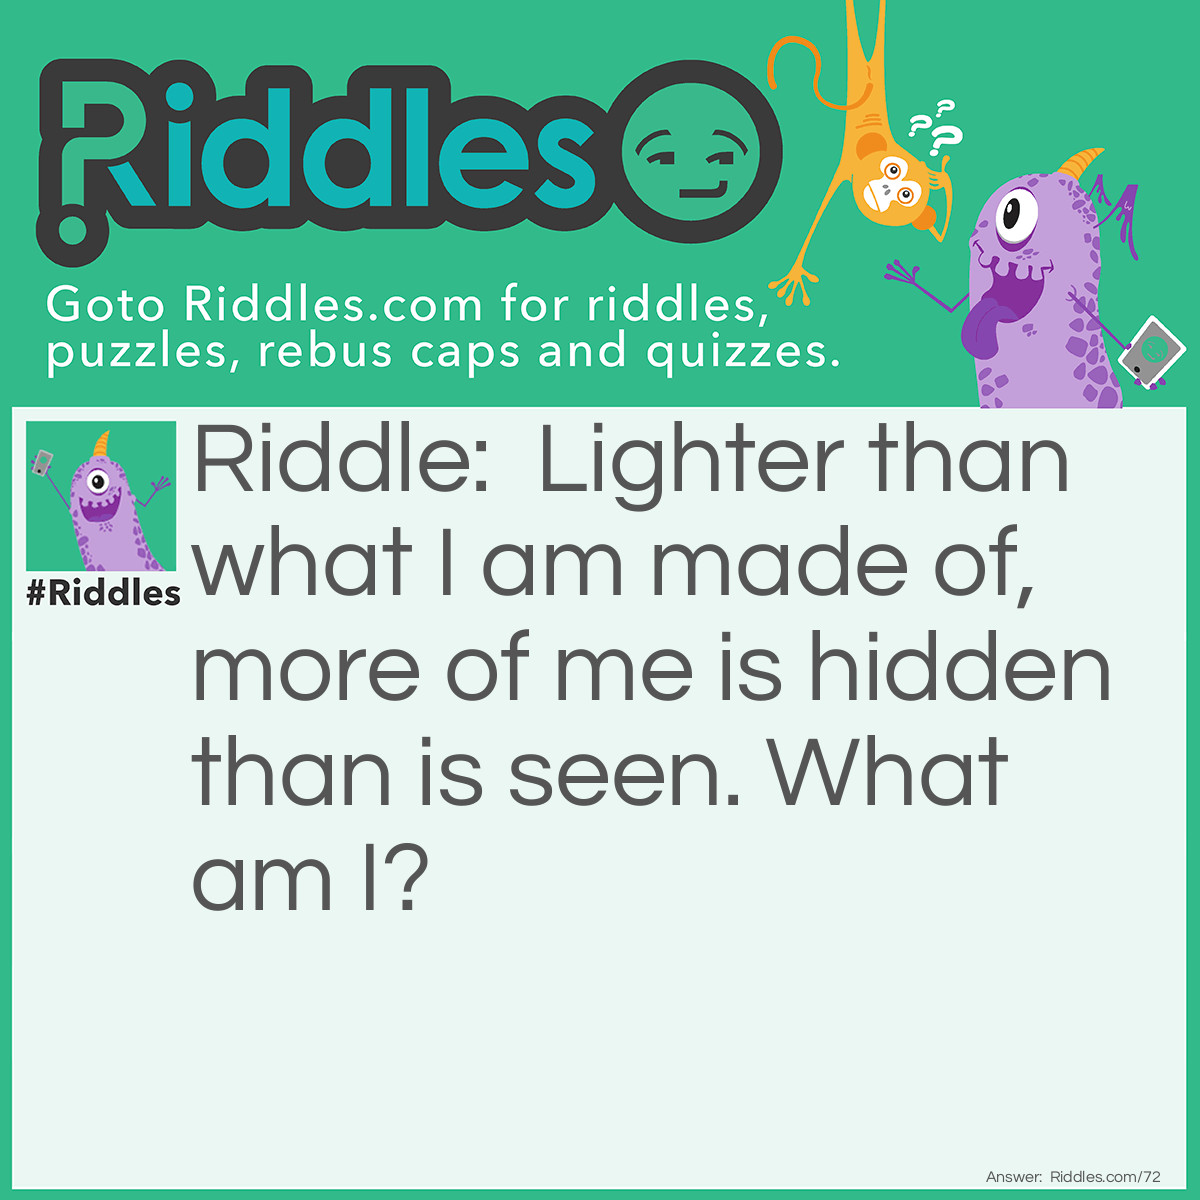 Riddle: Lighter than what I am made of, more of me is hidden than is seen. What am I? Answer: I am an Iceberg.